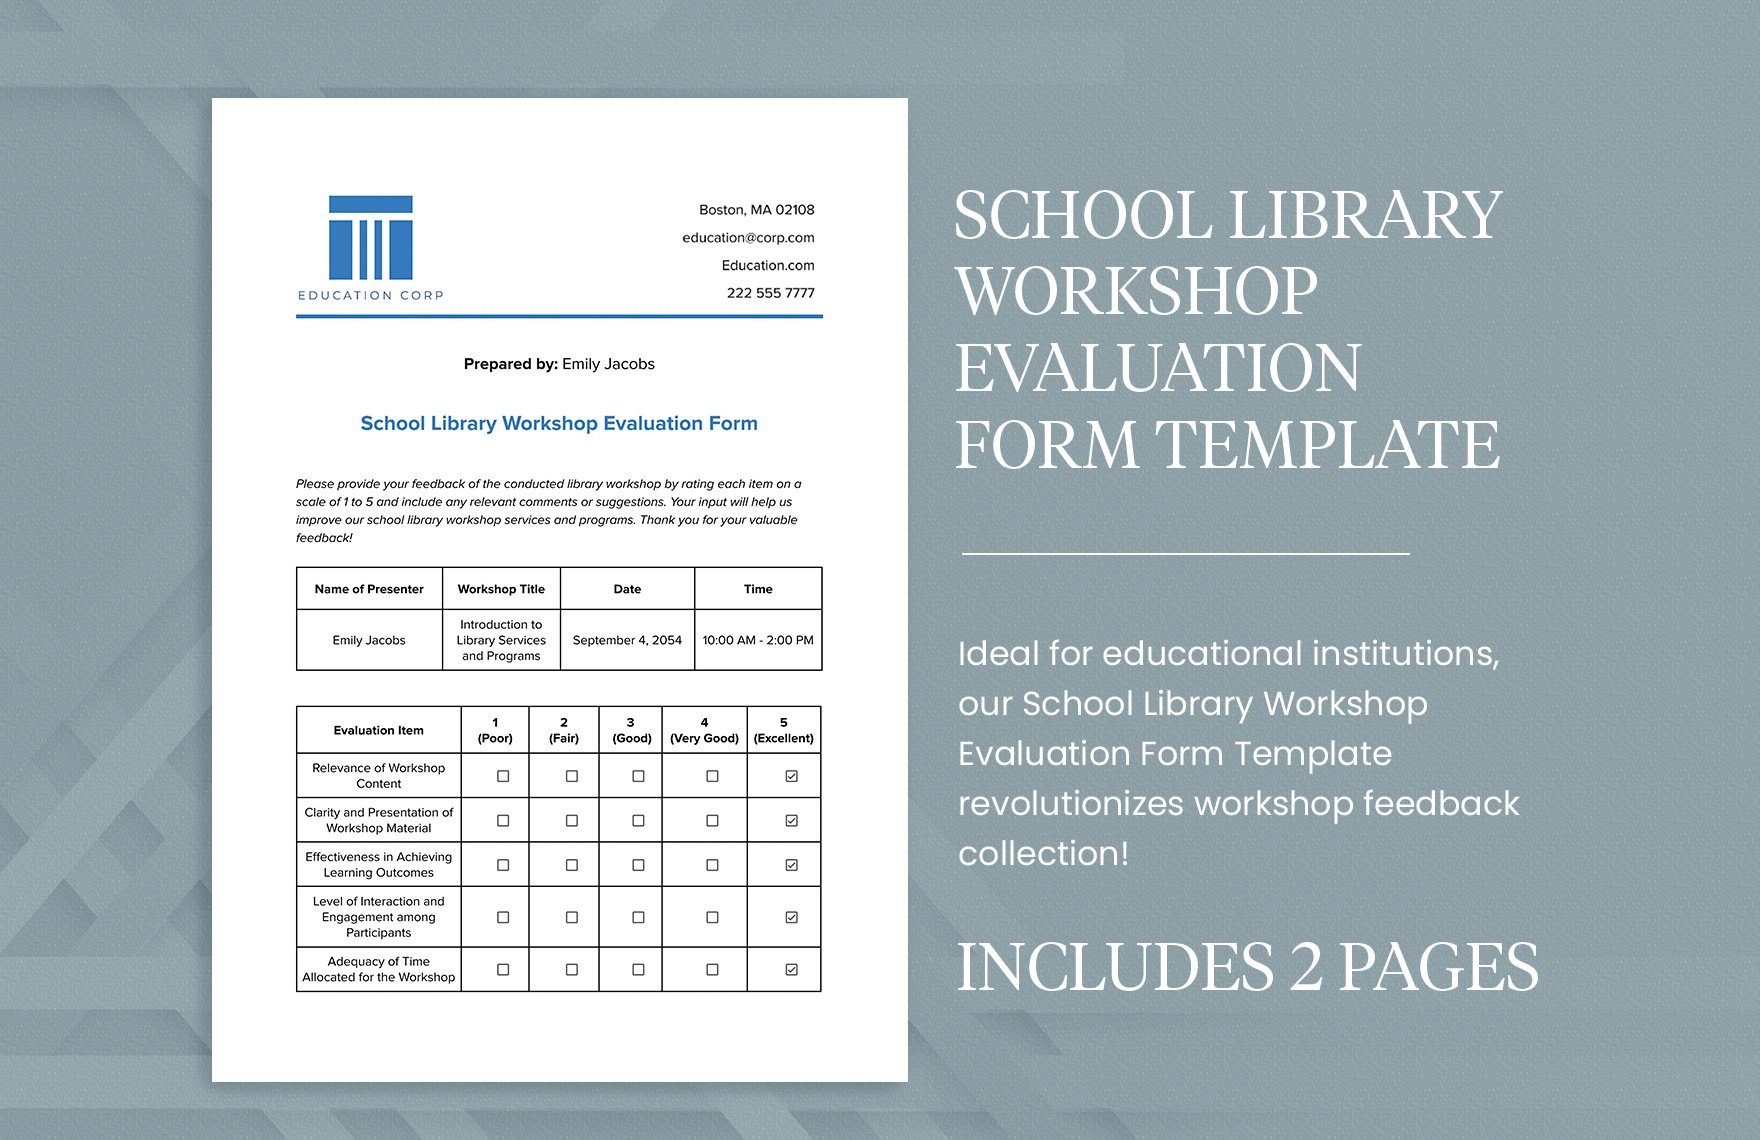 School Library Workshop Evaluation Form Template in Word, Google Docs, PDF